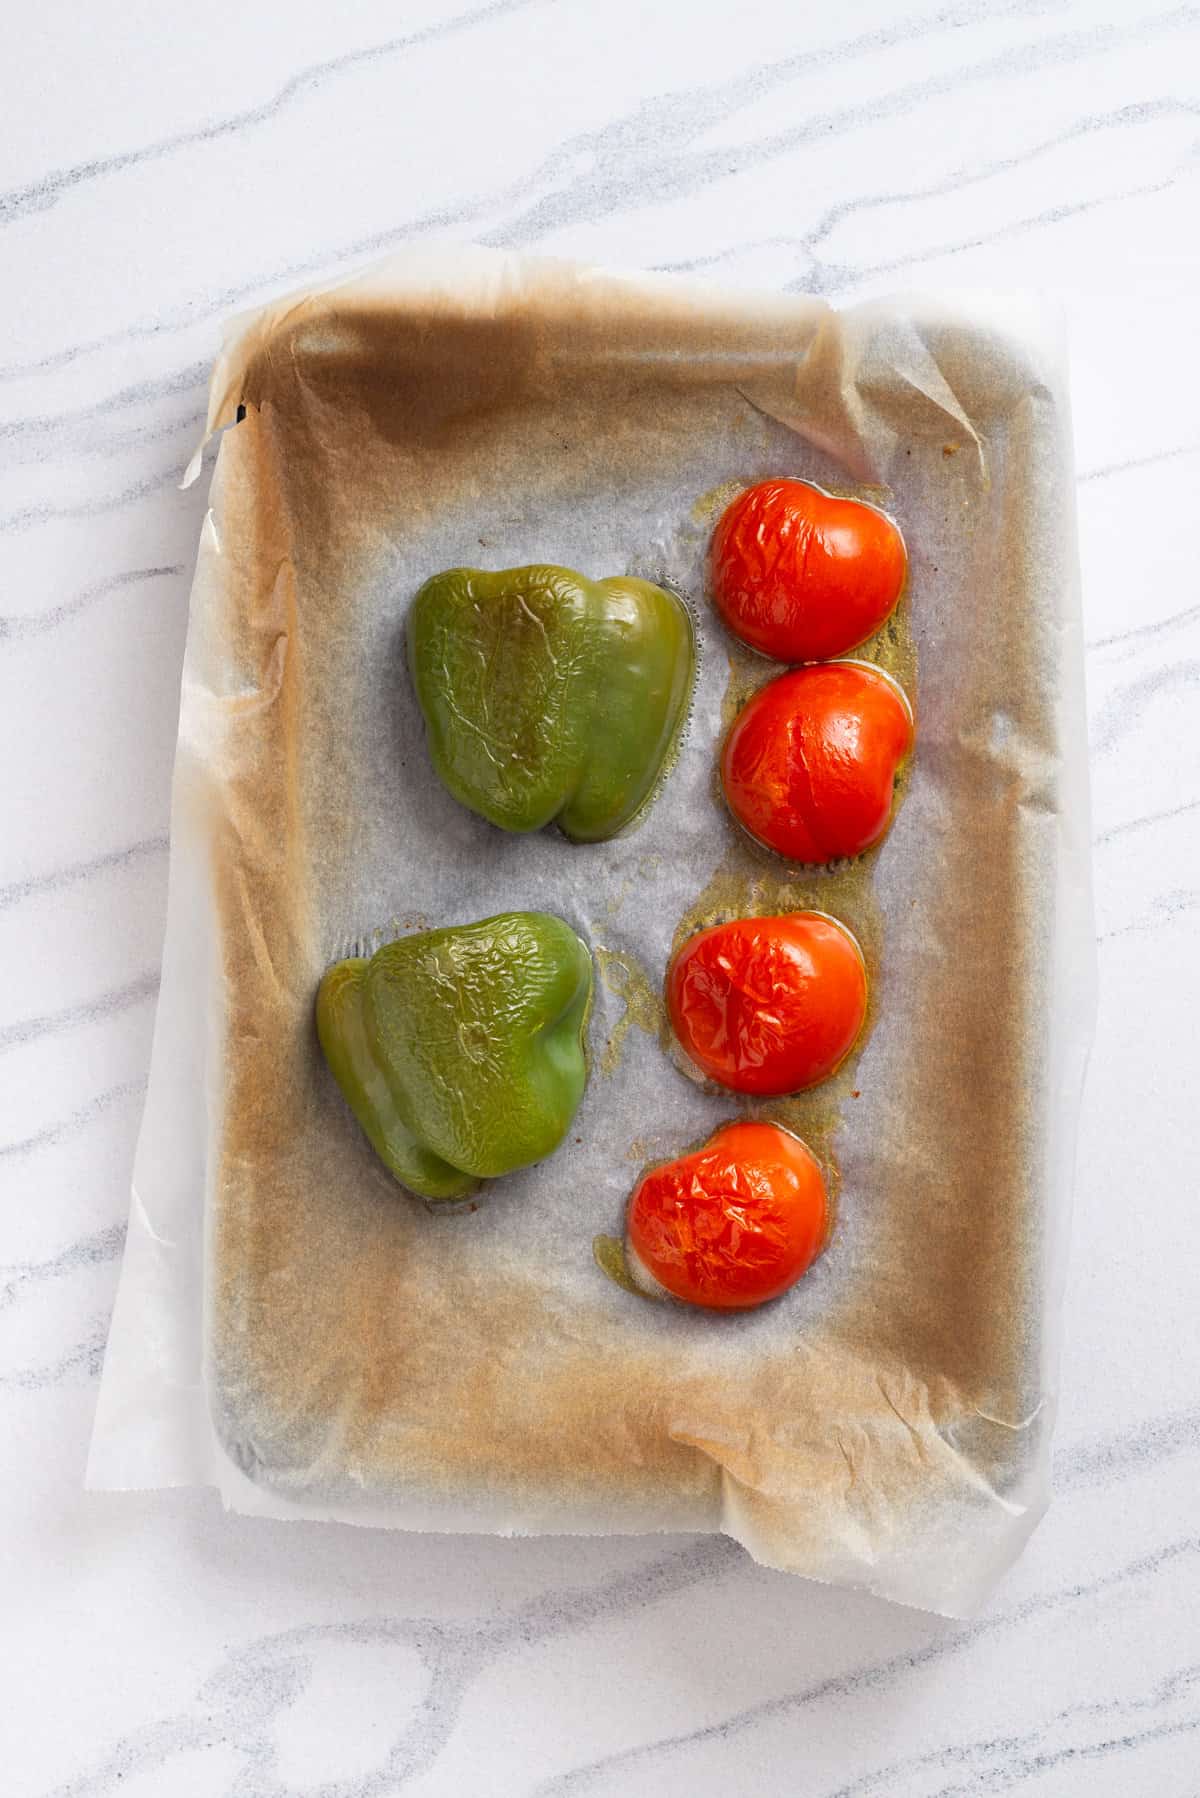 An image of a roasted bell pepper and tomatoes, in a baking pan.